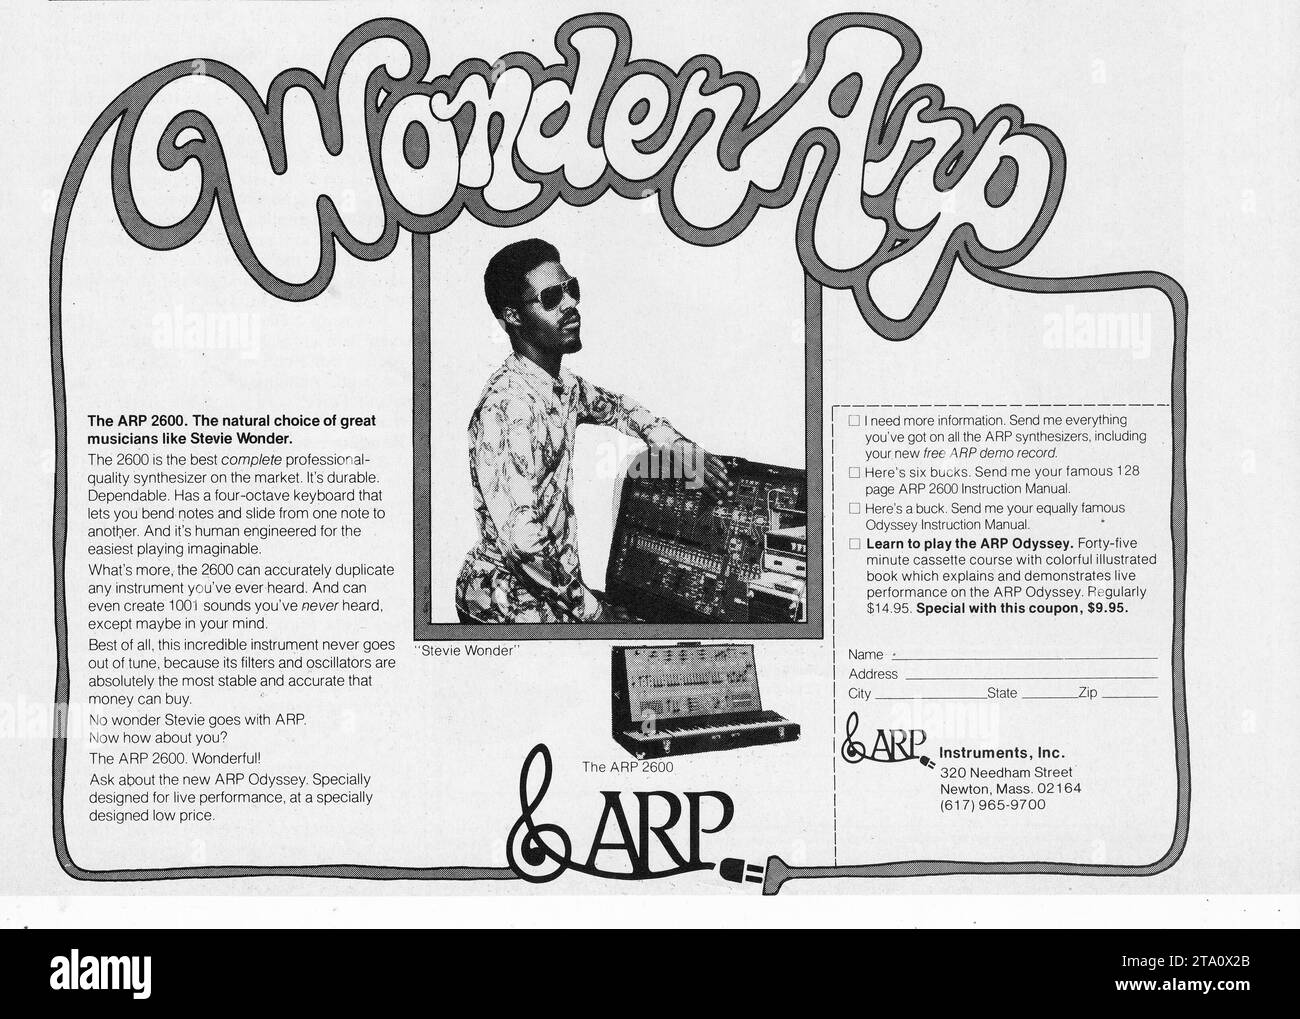 Stevie Wonder in an early 1970s advertisement for ARP Synthesizers. ARPs were manufactured from the 1960s to the 1980s. Stock Photo